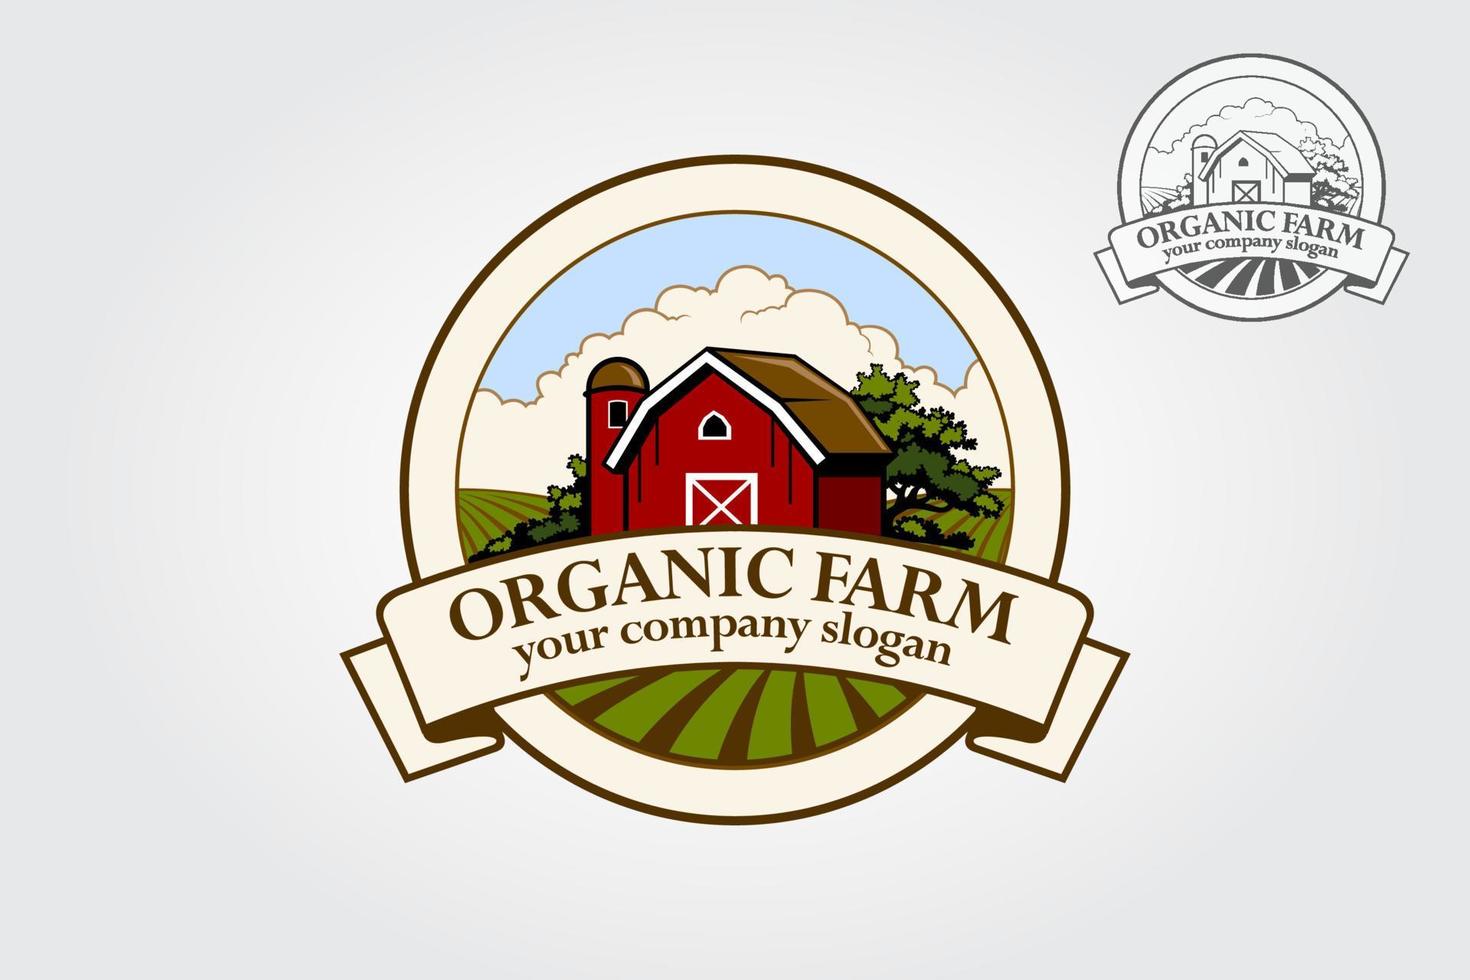 Organic Farm  Vector Logo Illustration. Cartoon illustration of red farm barn. Logo template suitable for business and product names.